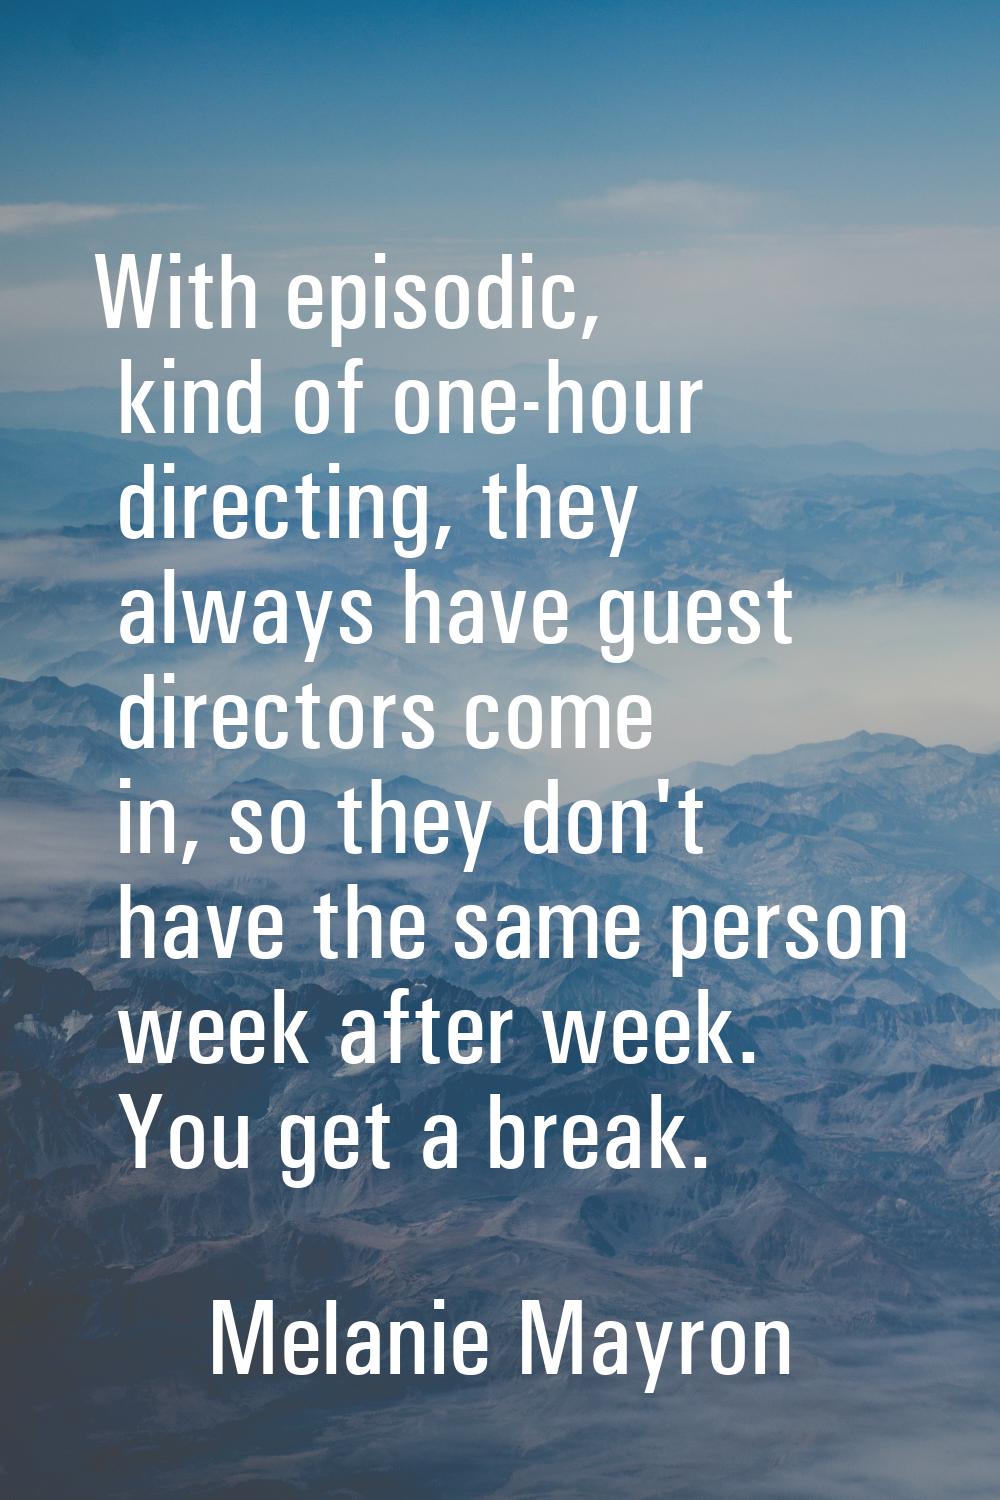 With episodic, kind of one-hour directing, they always have guest directors come in, so they don't 